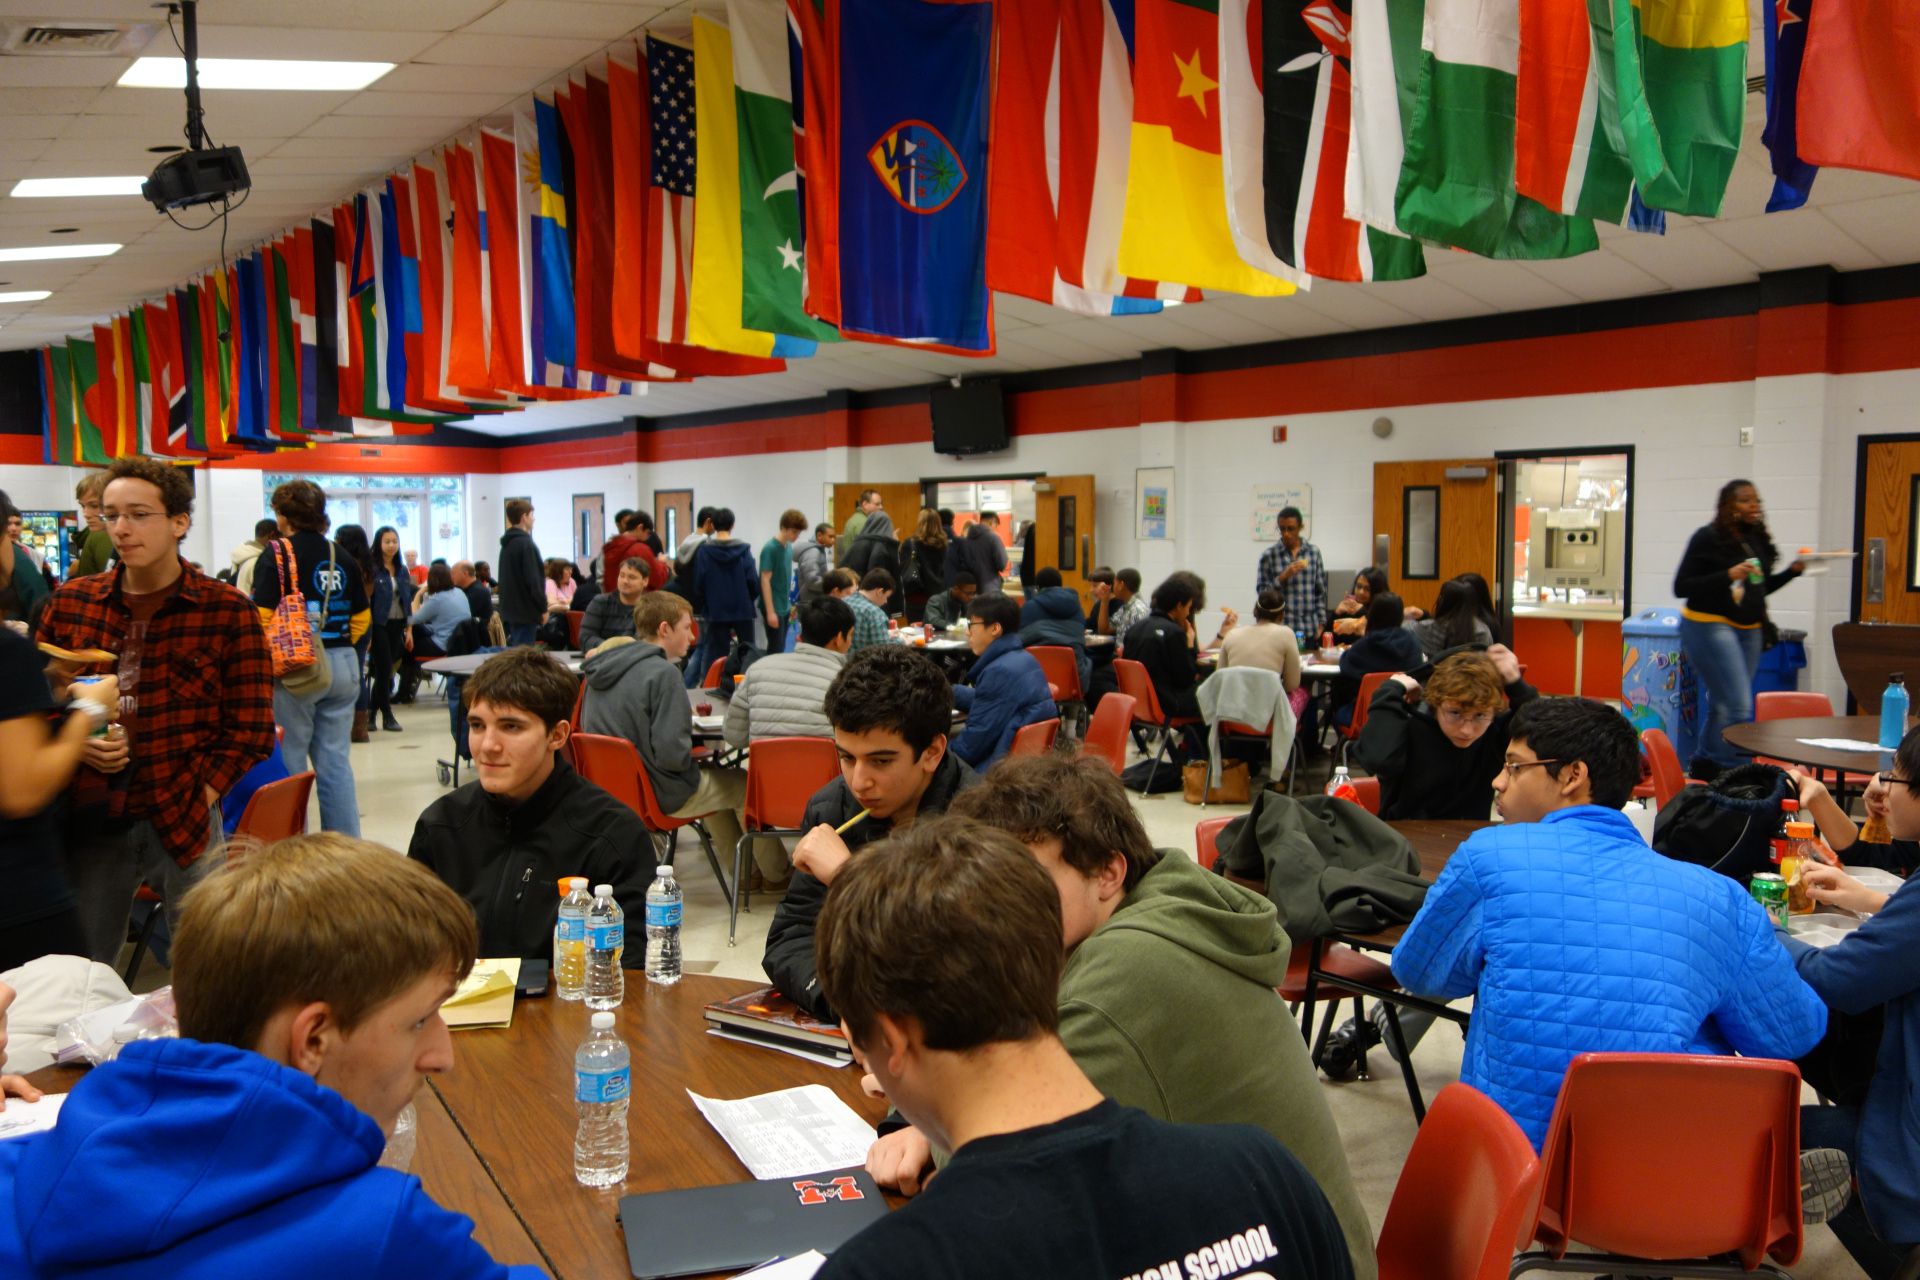 Students attending a 2015 workshop in the cafeteria with national flags lining the ceiling.